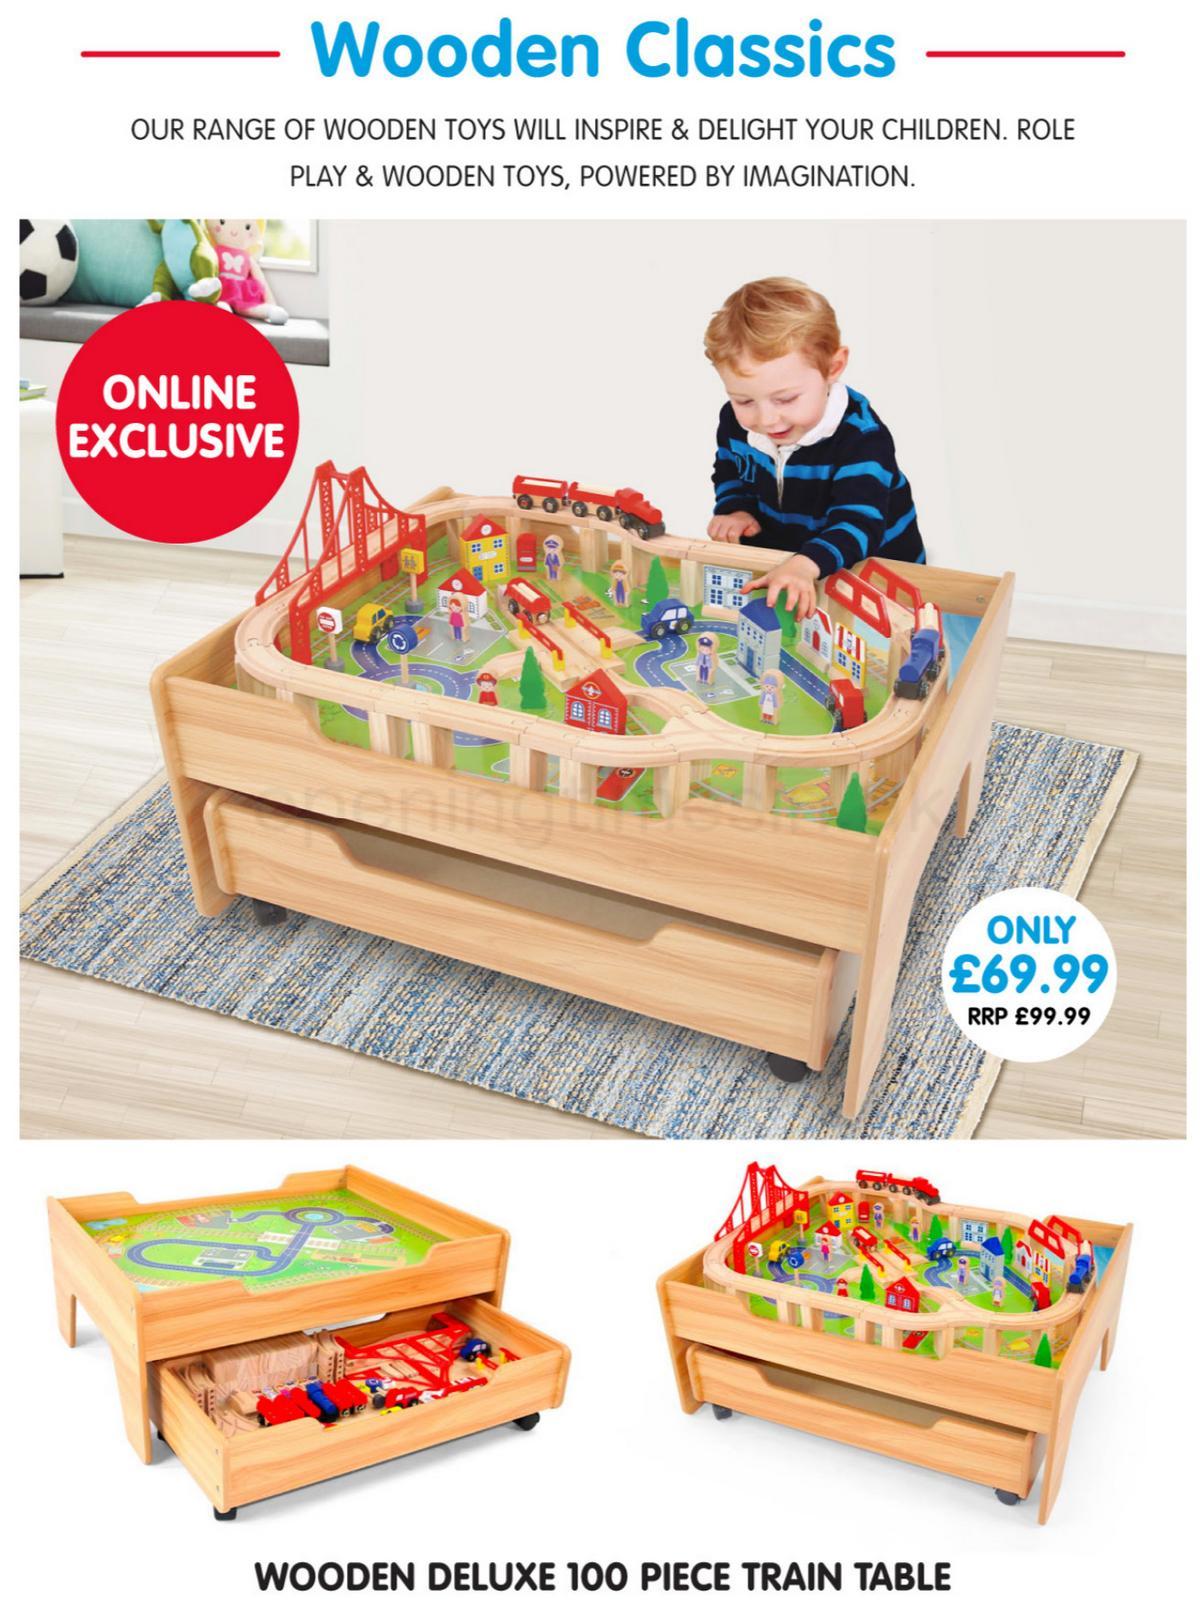 Home Bargains Unmissable Toy Deals Offers from 4 December